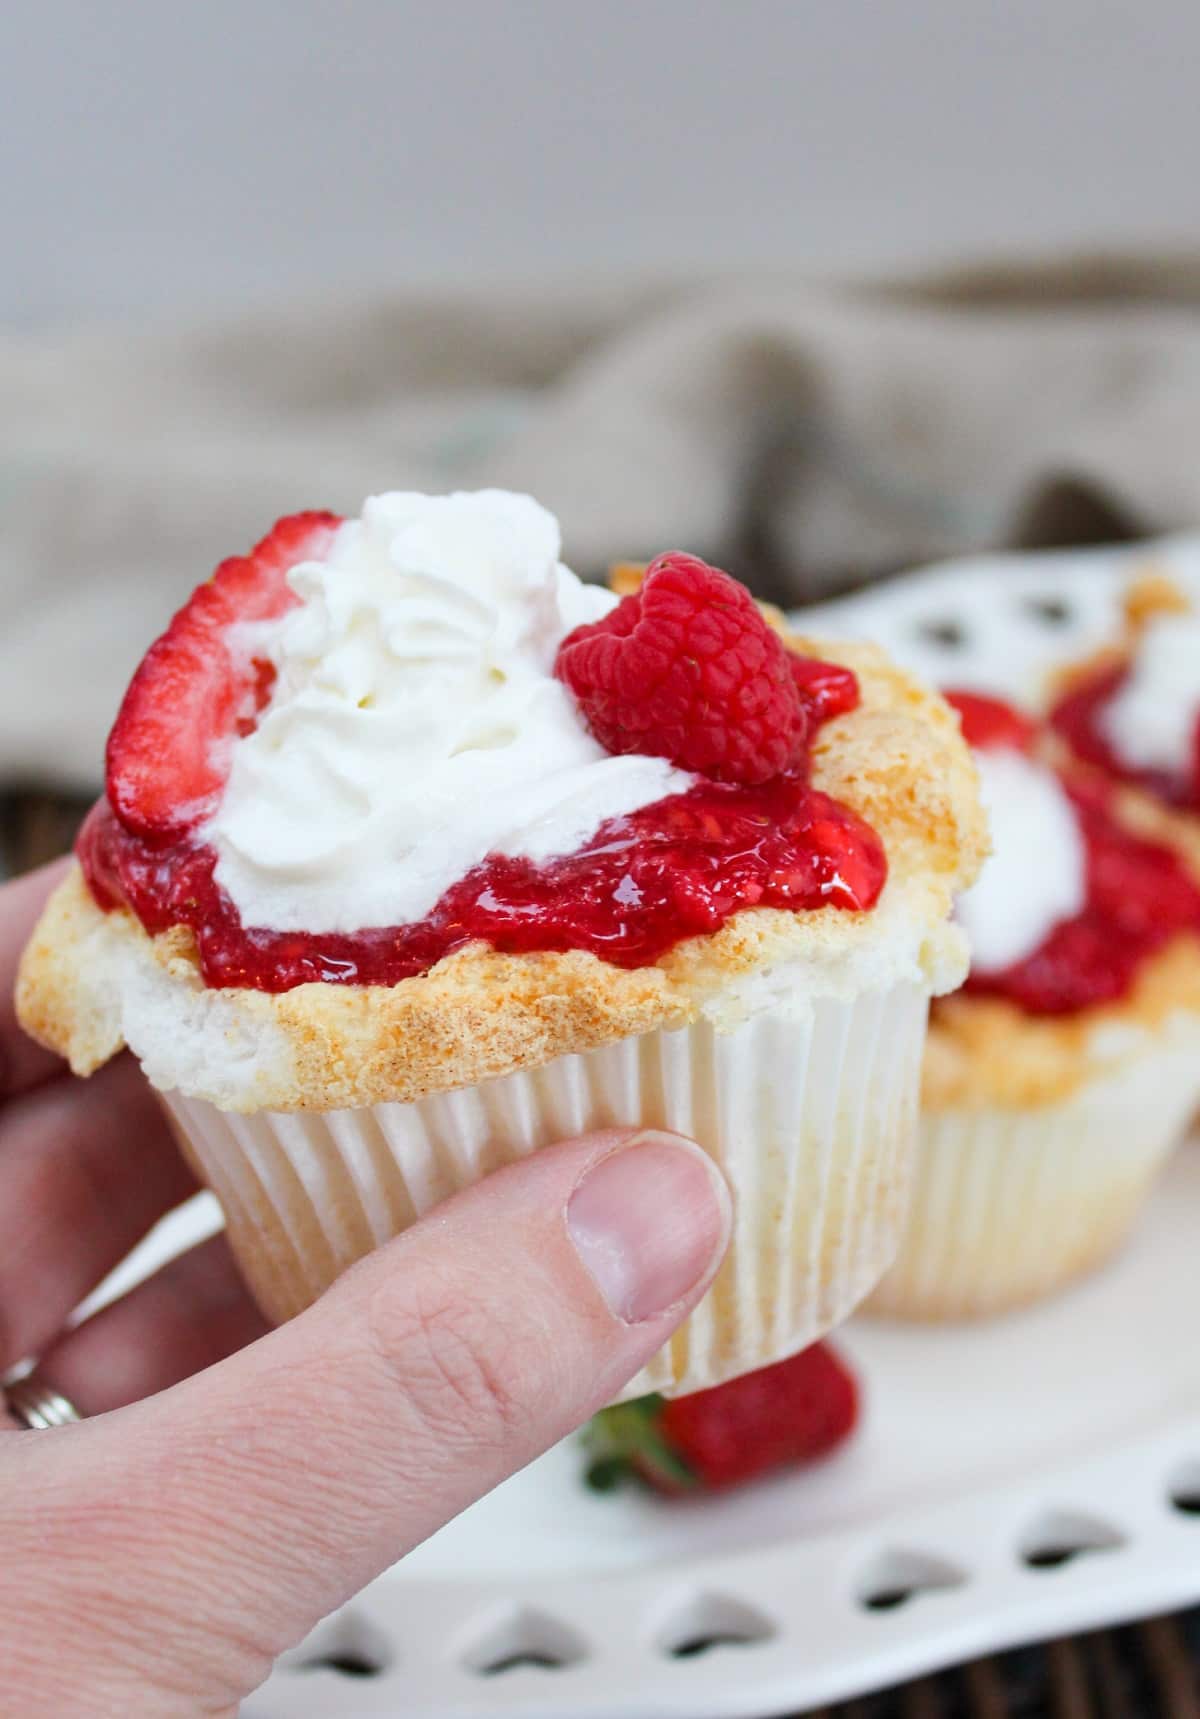 cupcake with berries and whipped cream on top held in hand.